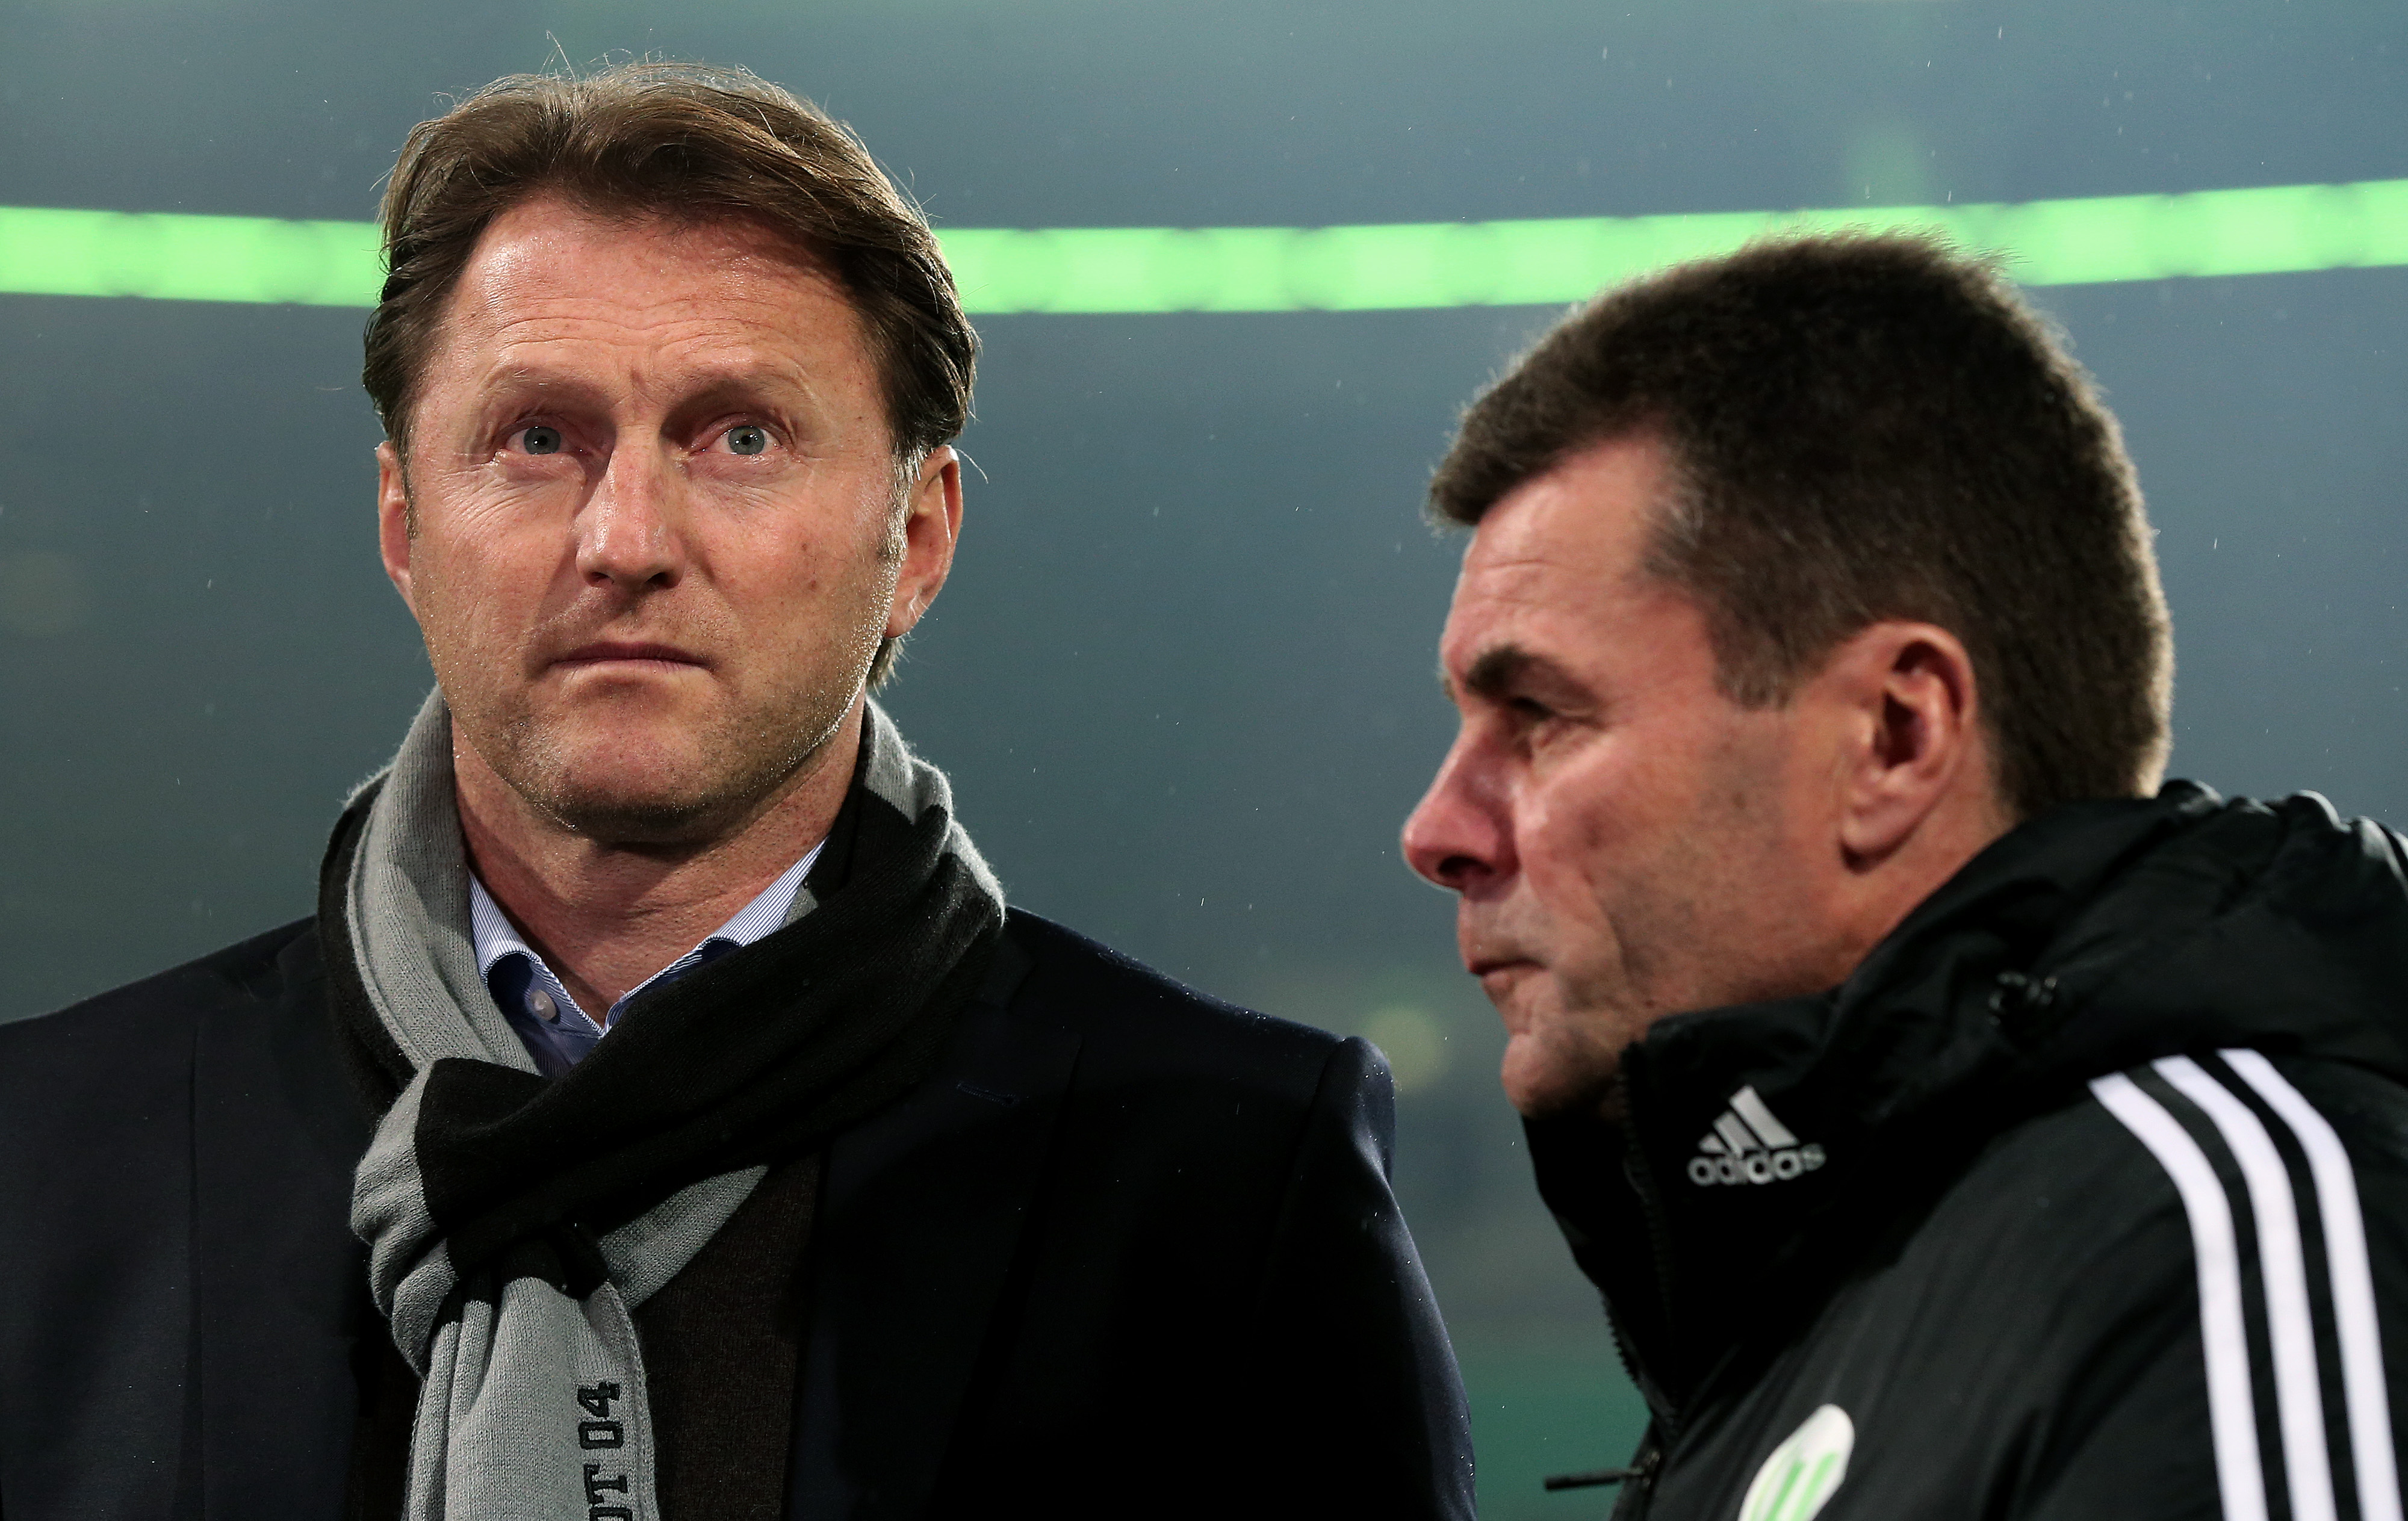 WOLFSBURG, GERMANY - DECEMBER 04:  Headcoach Ralph Hasenhuettl (L) of Ingolstadt and headcoach Dieter Hecking of Wolfsburg prior to the DFB Cup round of 16 match between VfL Wolfsburg and FC Ingolstadt at Volkswagen Arena on December 04, 2013 in Wolfsburg, Germany.  (Photo by Ronny Hartmann/Bongarts/Getty Images)